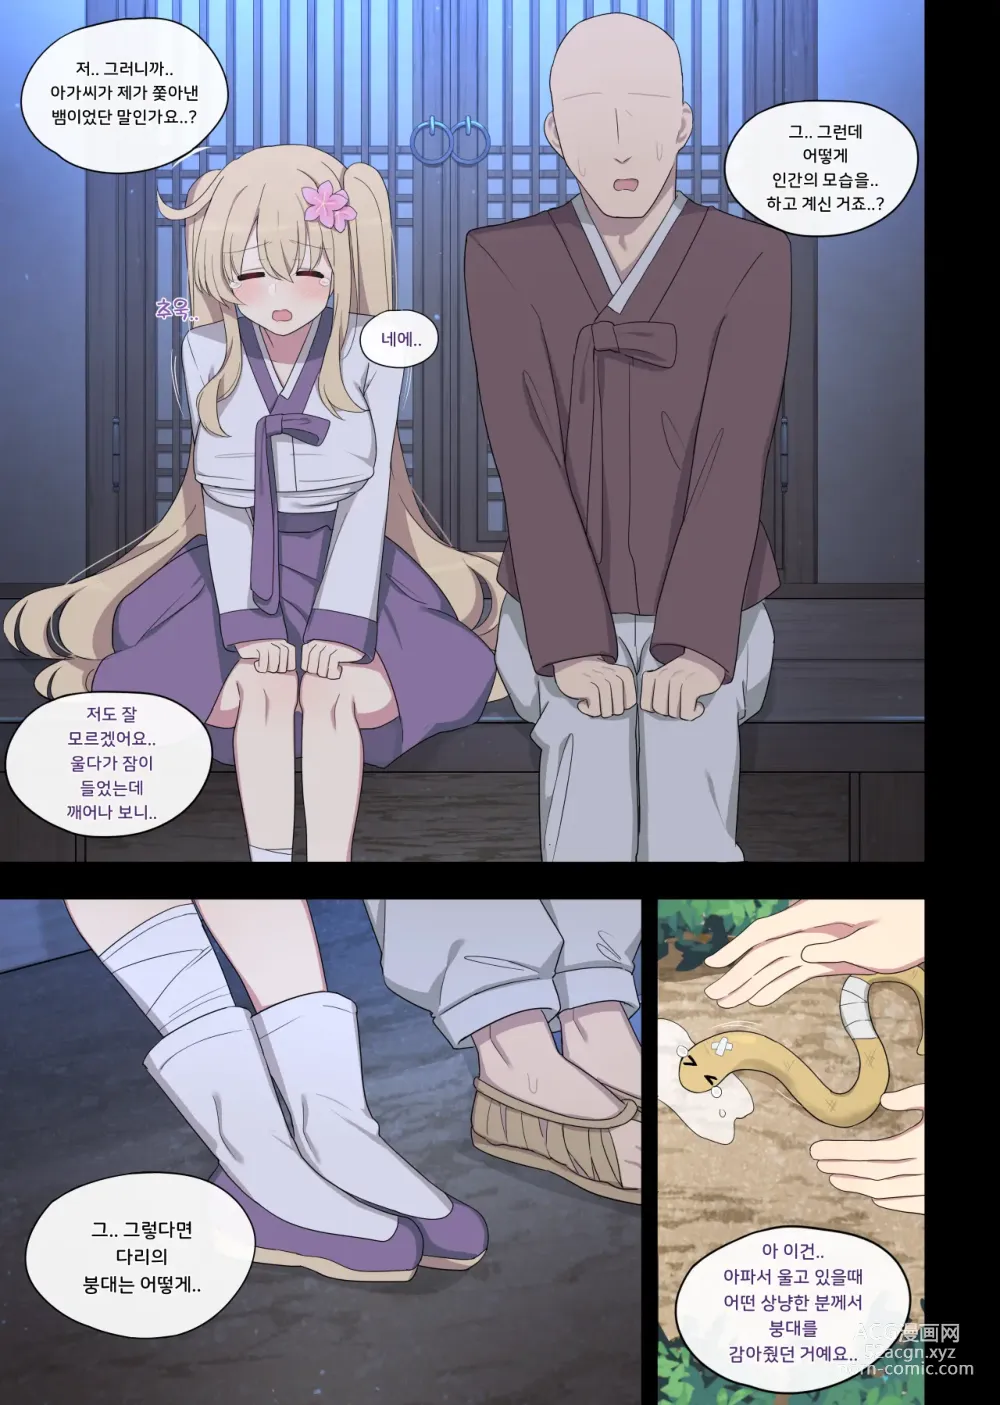 Page 10 of doujinshi The swallow that repaid a favor 1-2 (decensored)